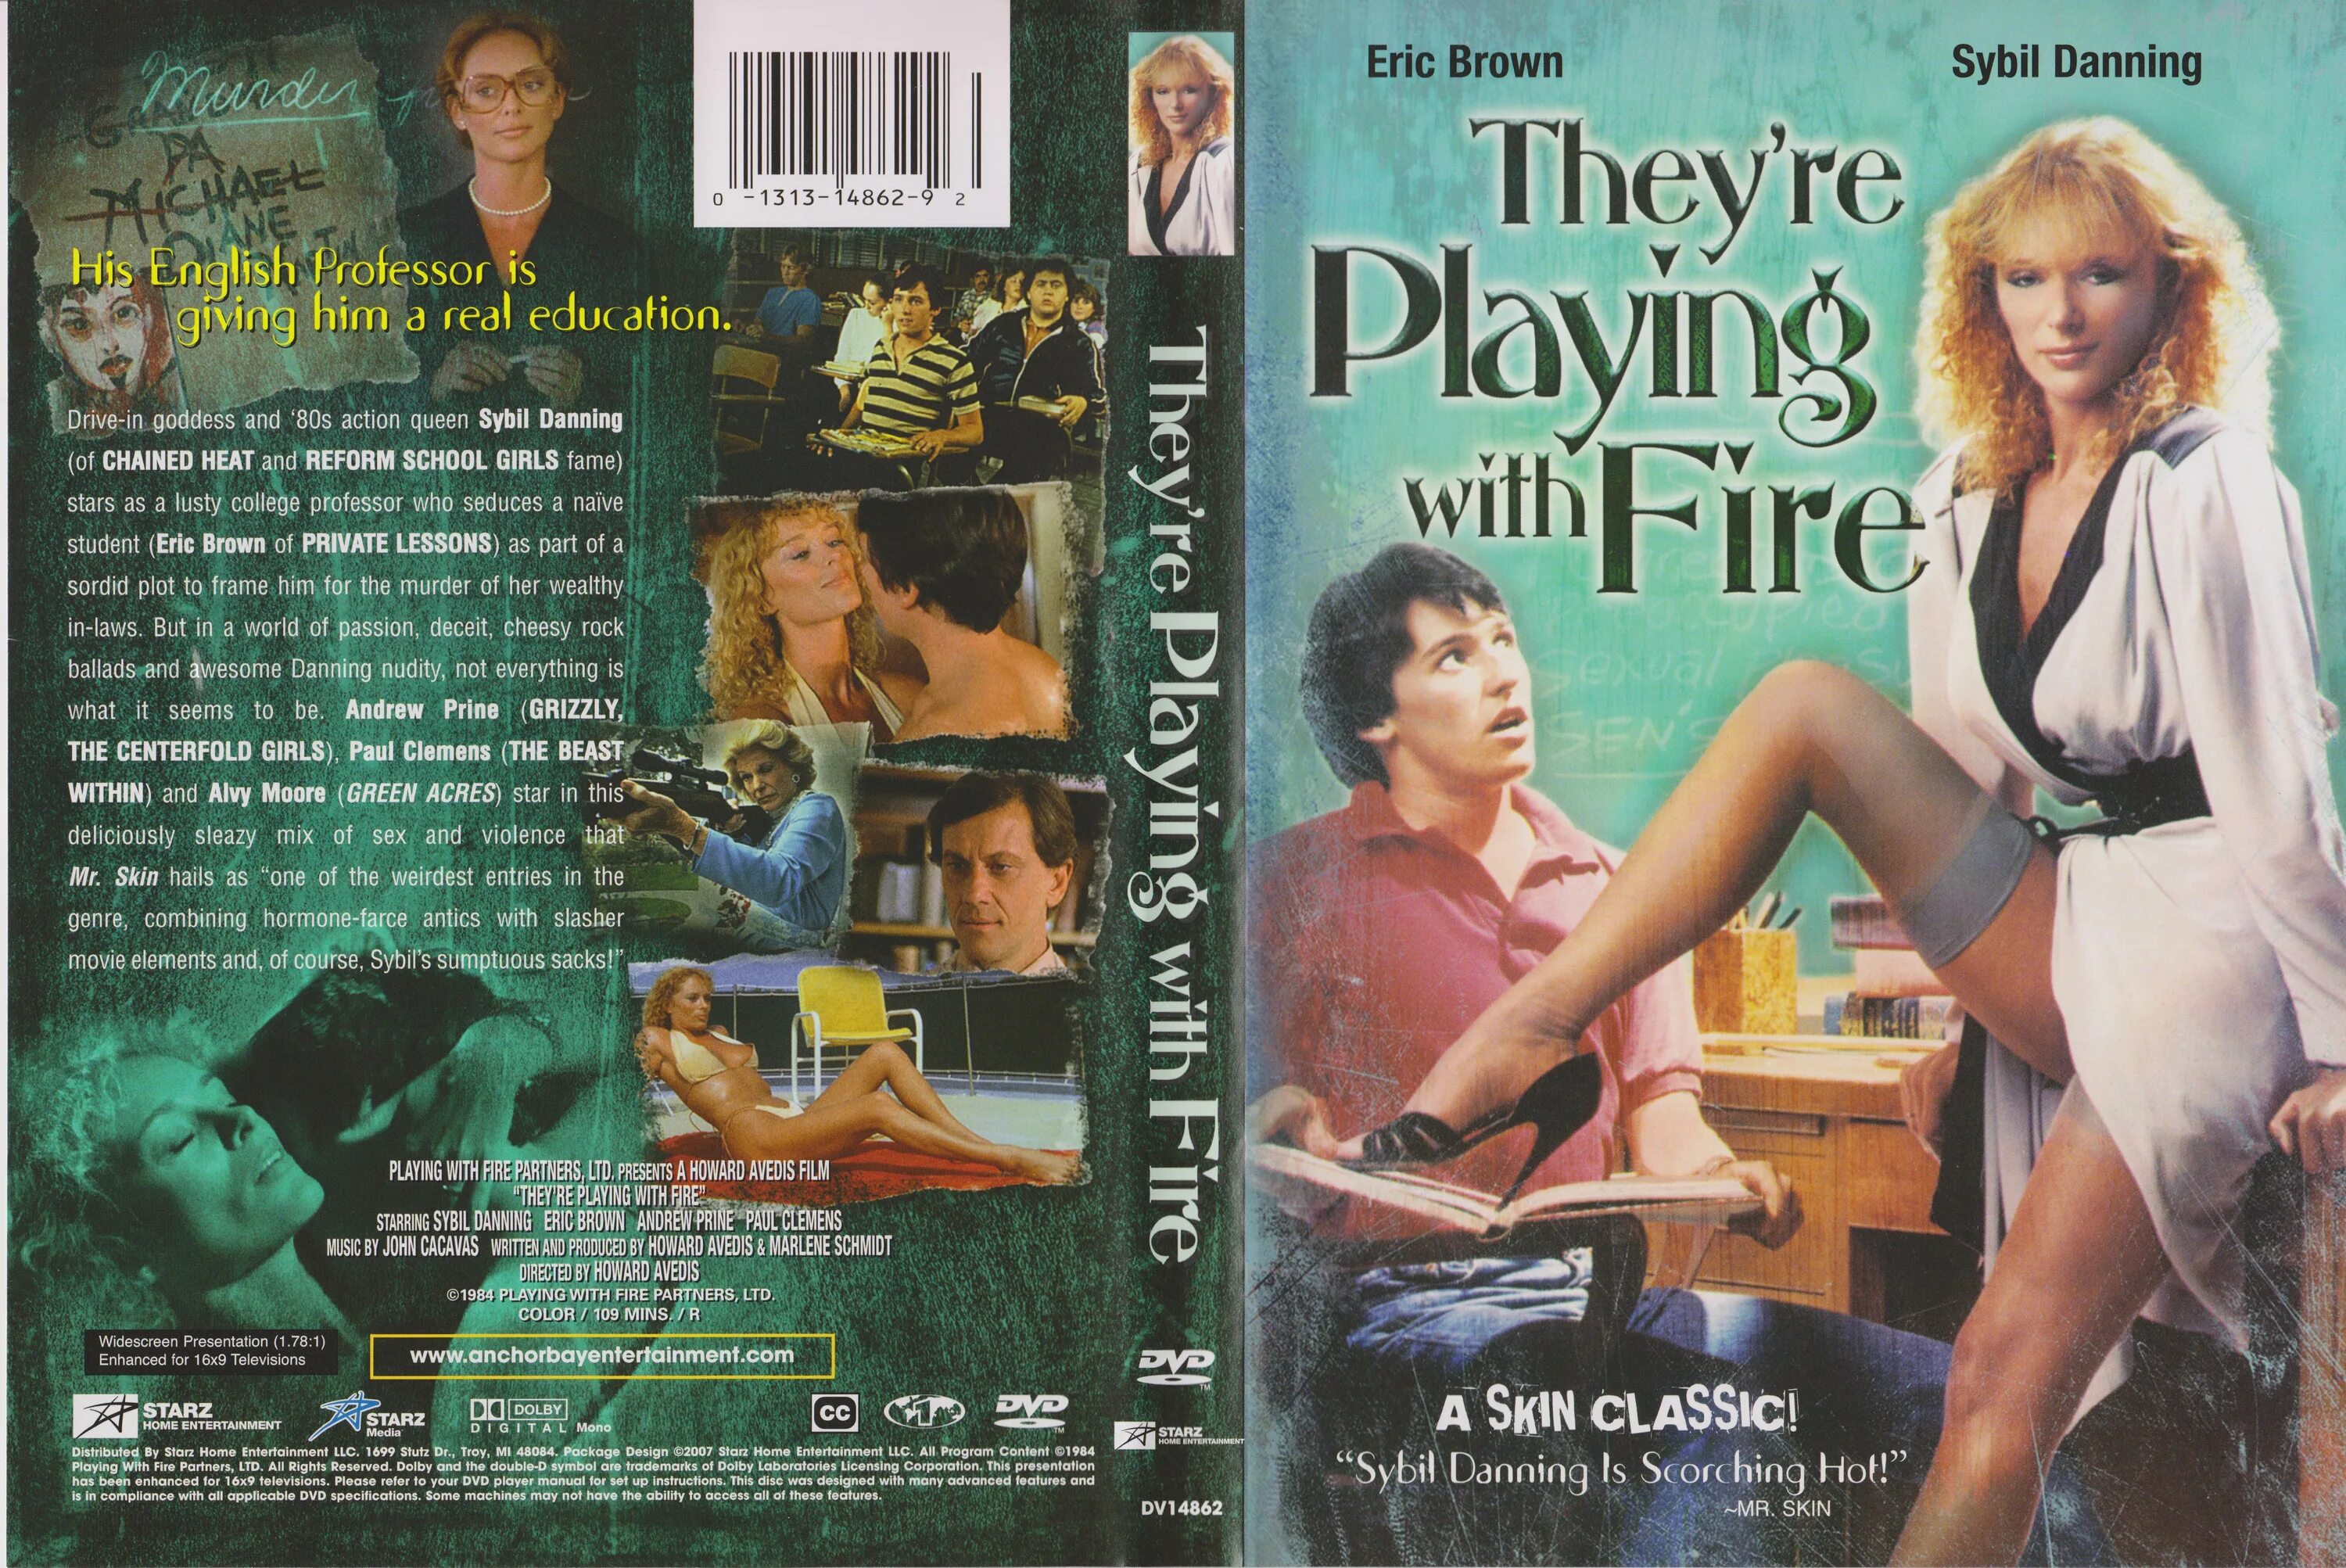 Playing with fire на русском. They're playing with Fire 1984. Сибил Даннинг they're playing with Fire. They're playing with Fire VHS. They're playing with Fire (1984) сцены.